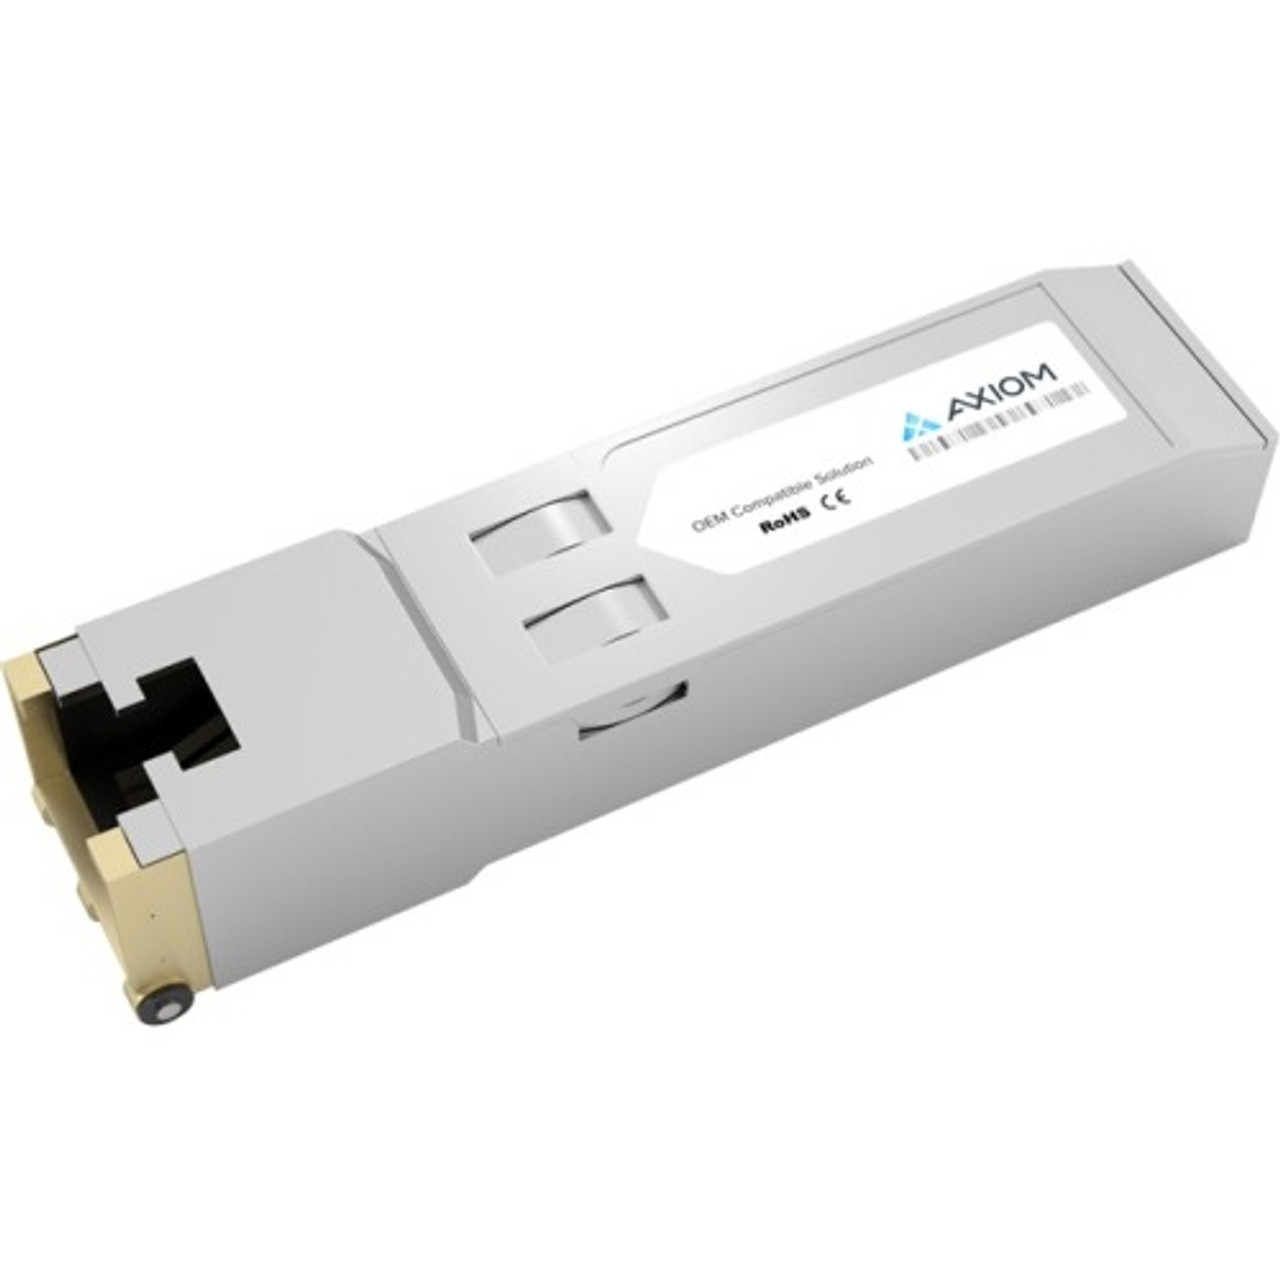 AXG92395 Axiom 1.25Gbps 1000Base-T Copper 100m RJ-45 Connector SFP Transceiver Module by Allied Telesis